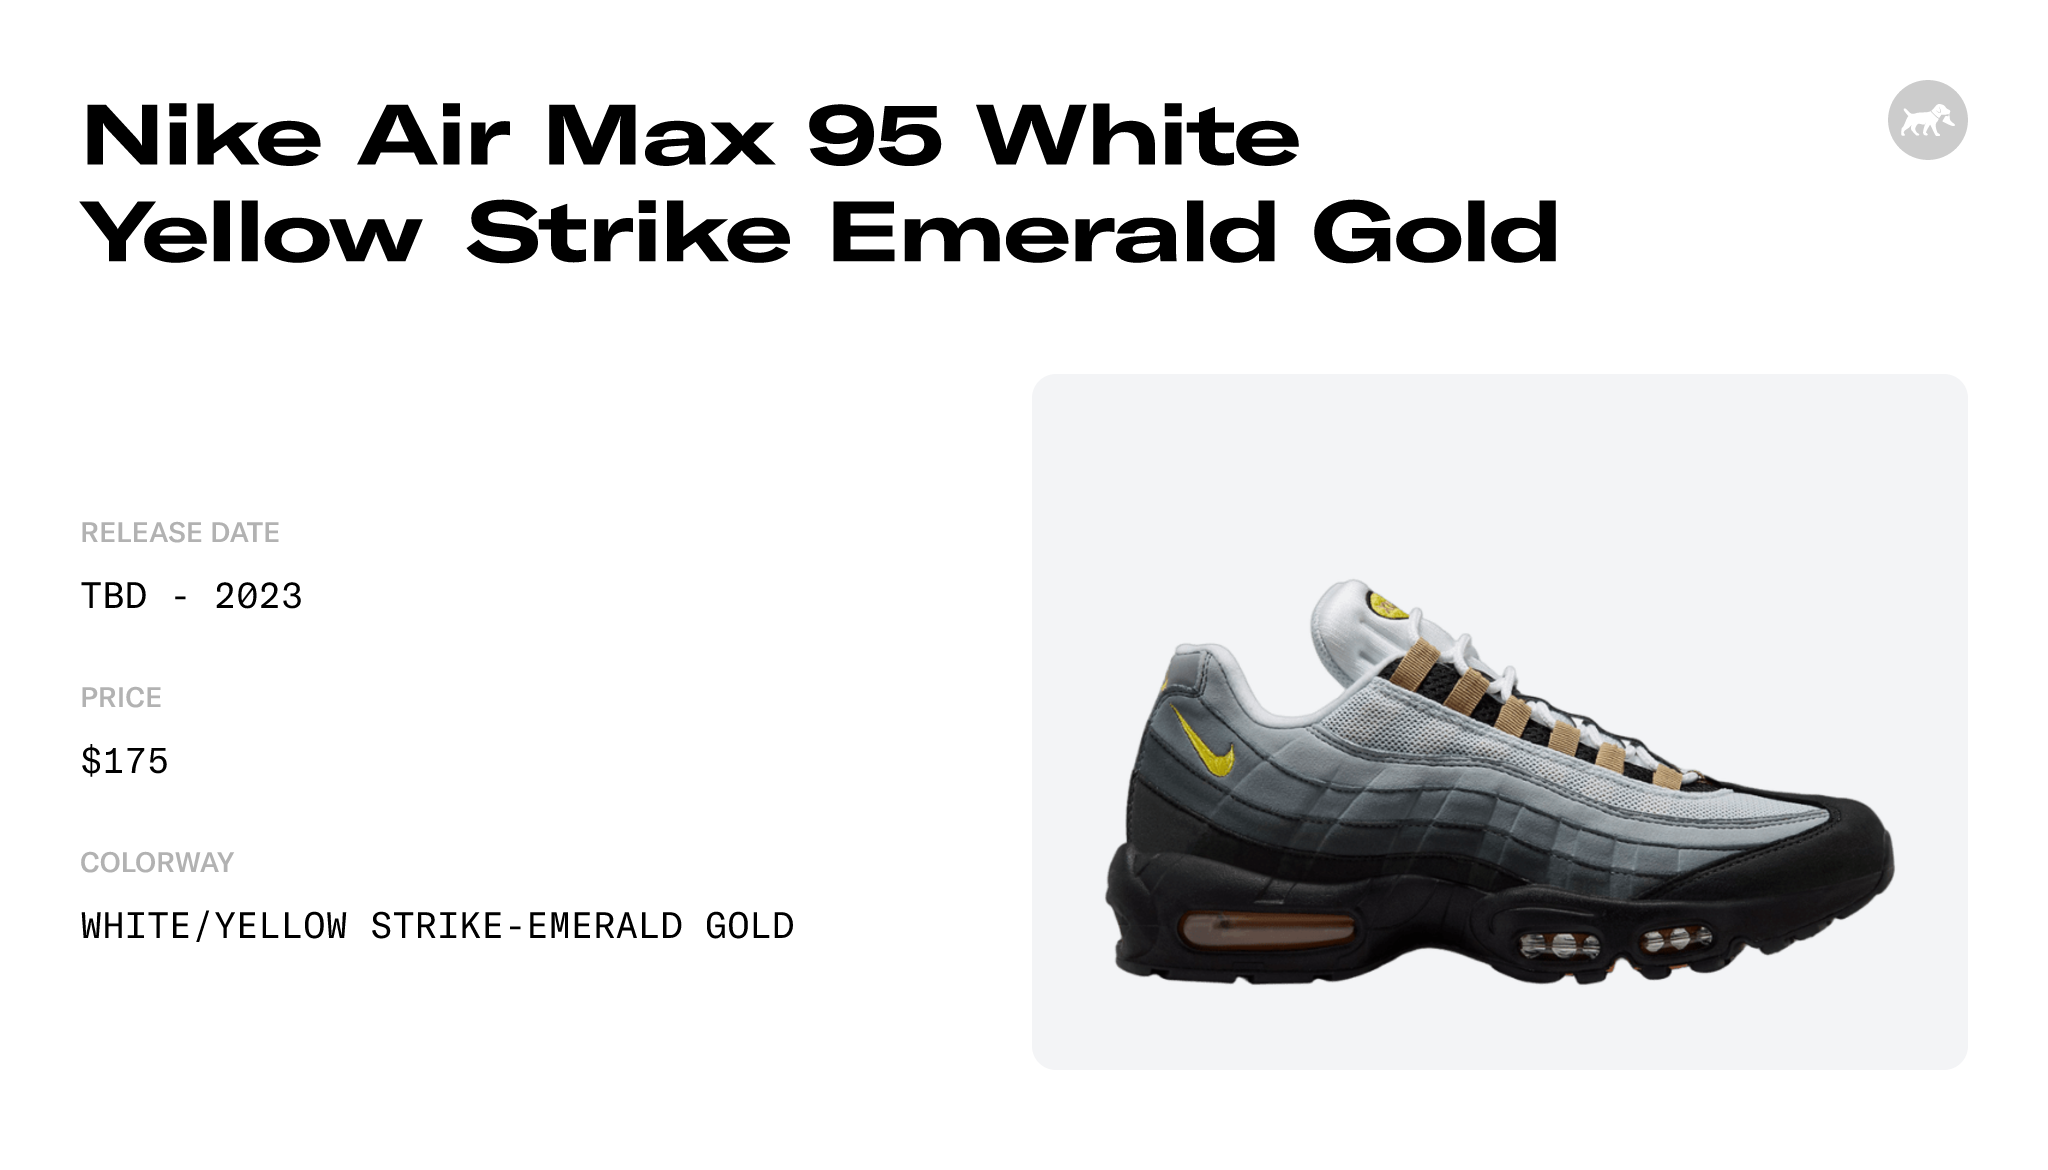 Nike Air Max 95 White Yellow Strike Emerald Gold - DX4236-100 Raffles and  Release Date